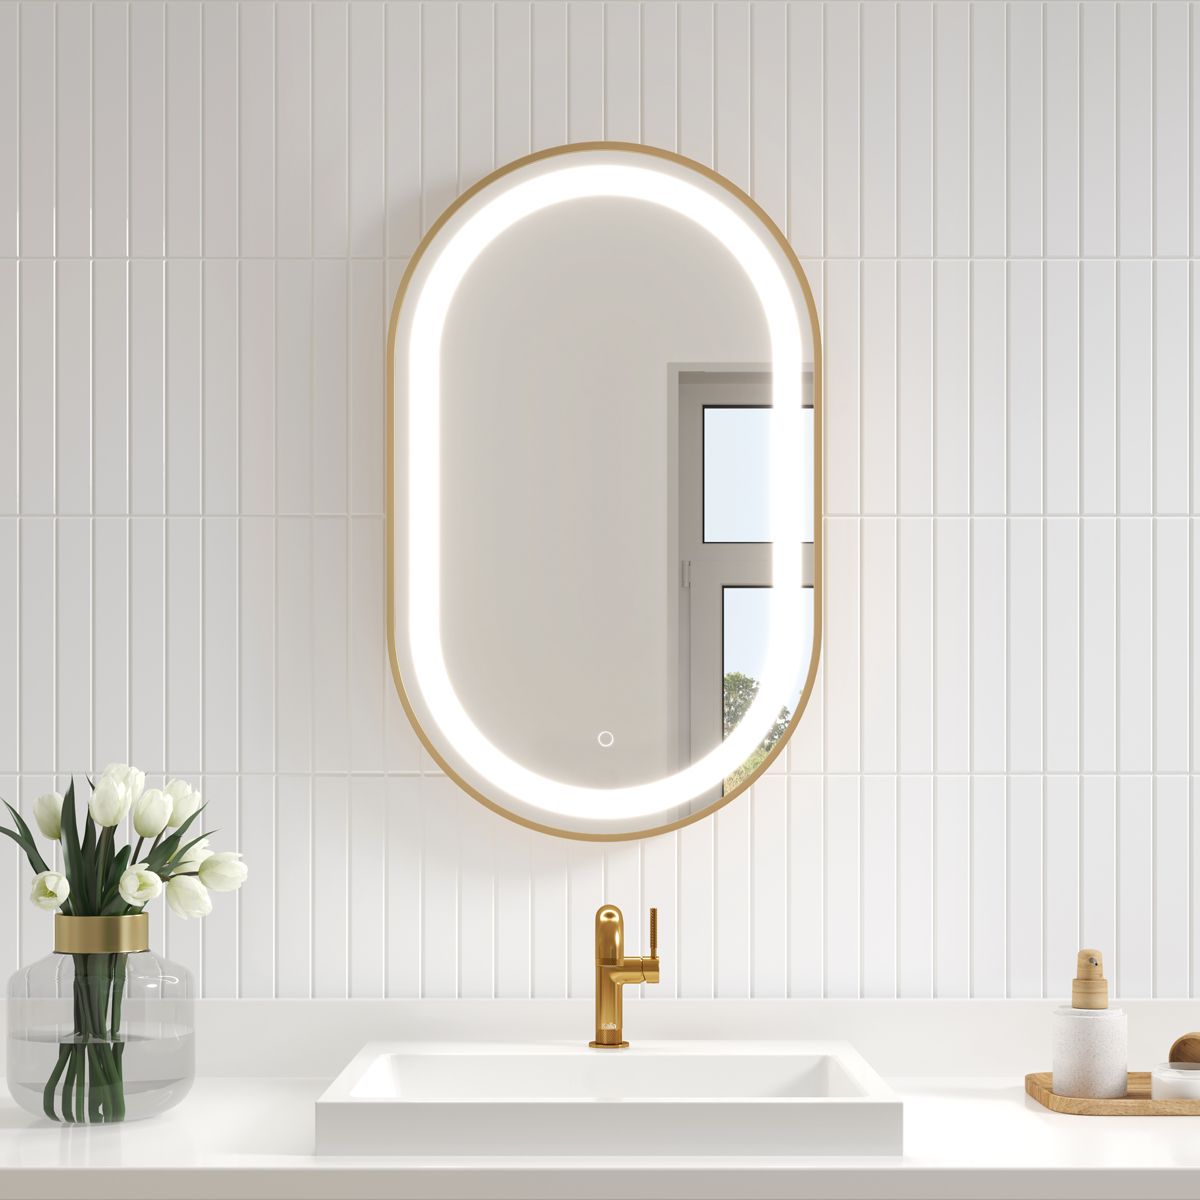 Kalia - Effect Oblong LED Illuminated Oblong Shape Brushed Gold Frame Mirror With Frosted Strip and Touch-switch for Color Temperature Control 20" X 32" X 1¾"